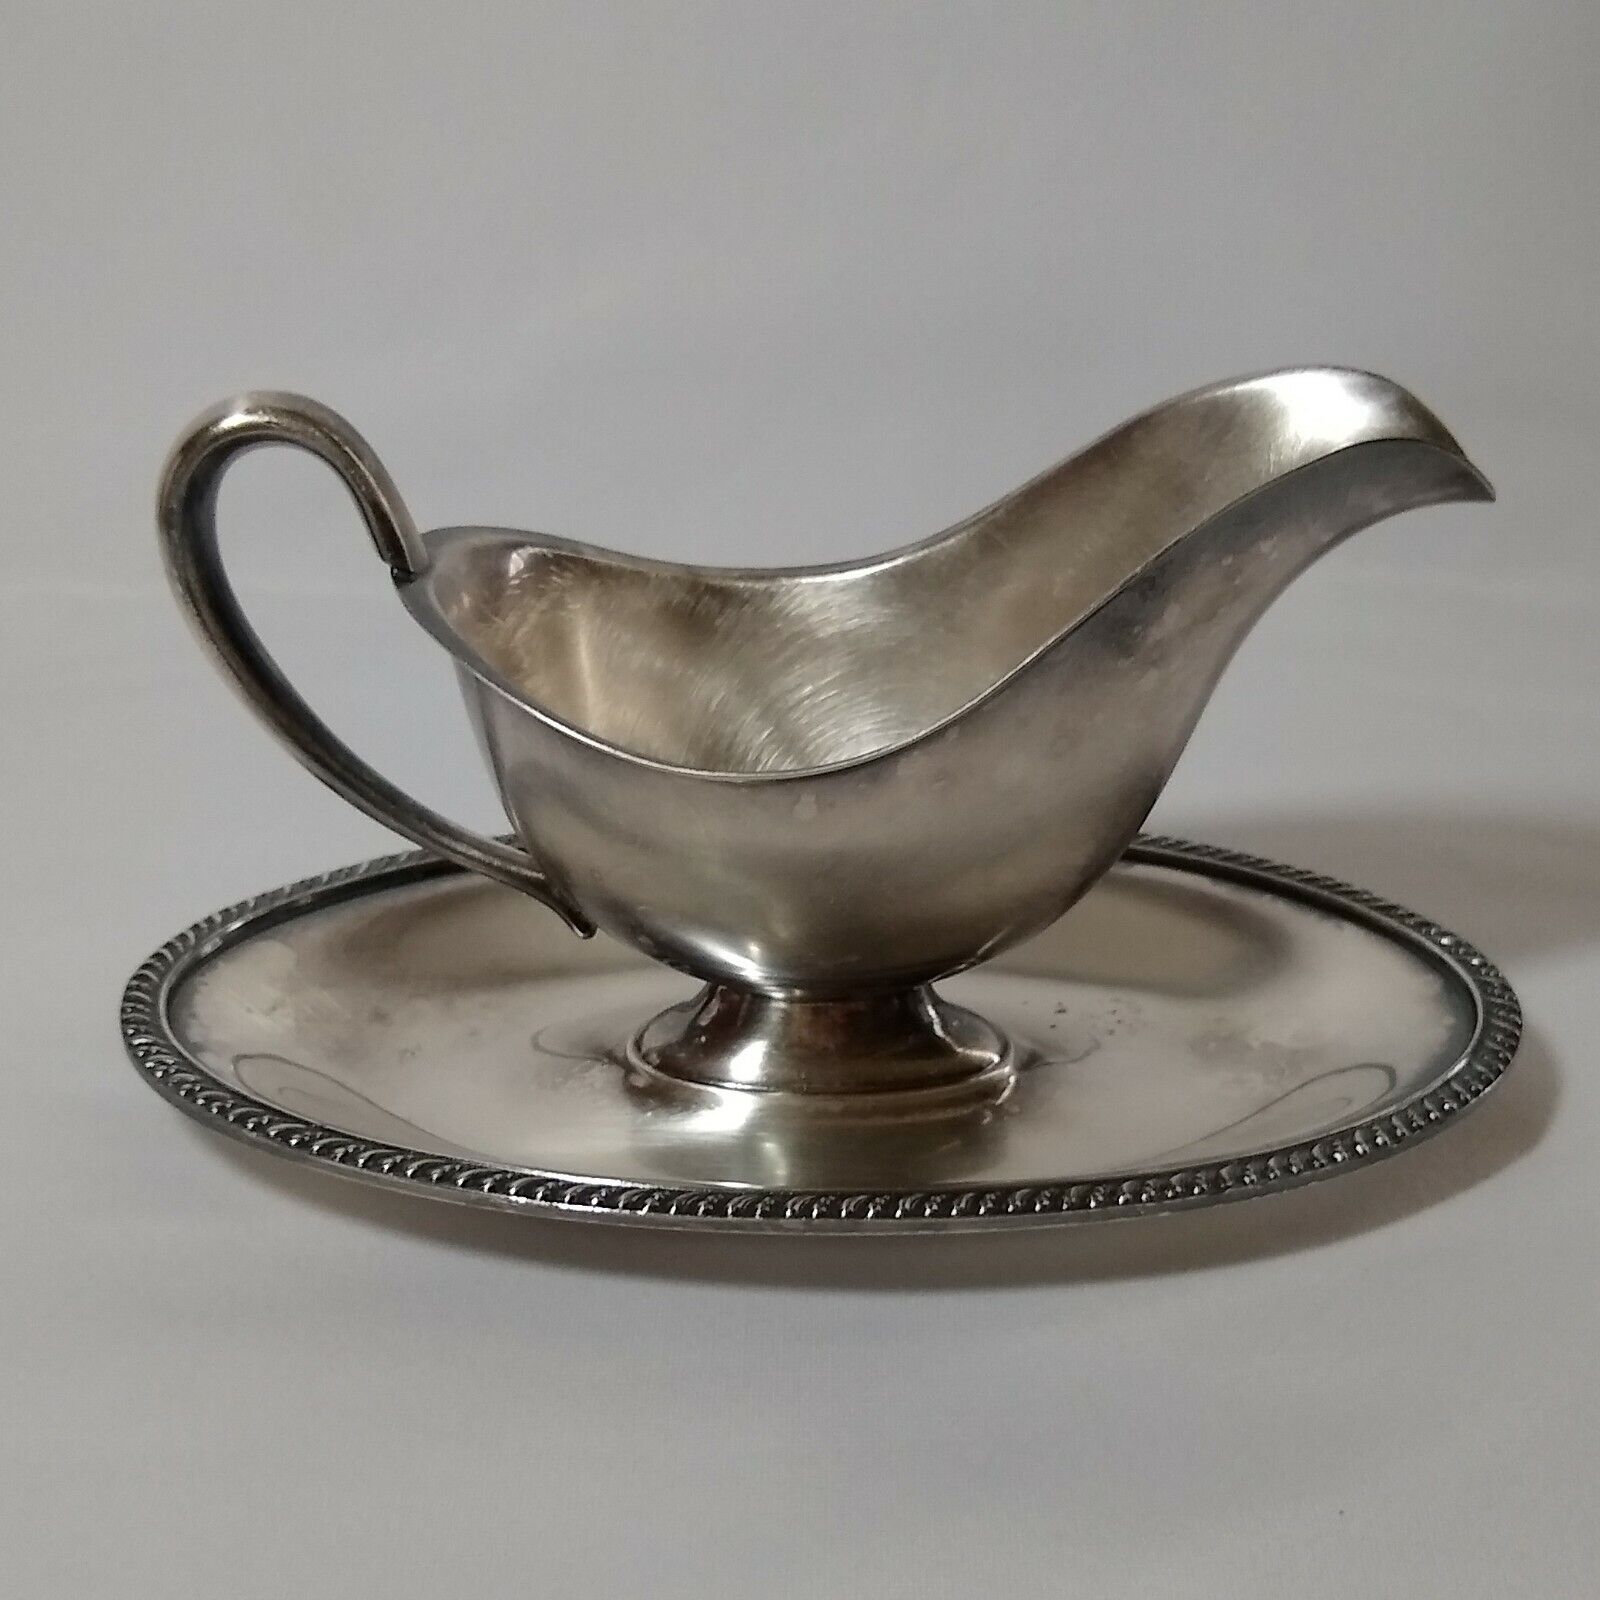 Avon Rogers Silver Plate Gravy Boat w/ Attached Spill Plate 3613 Vintage 